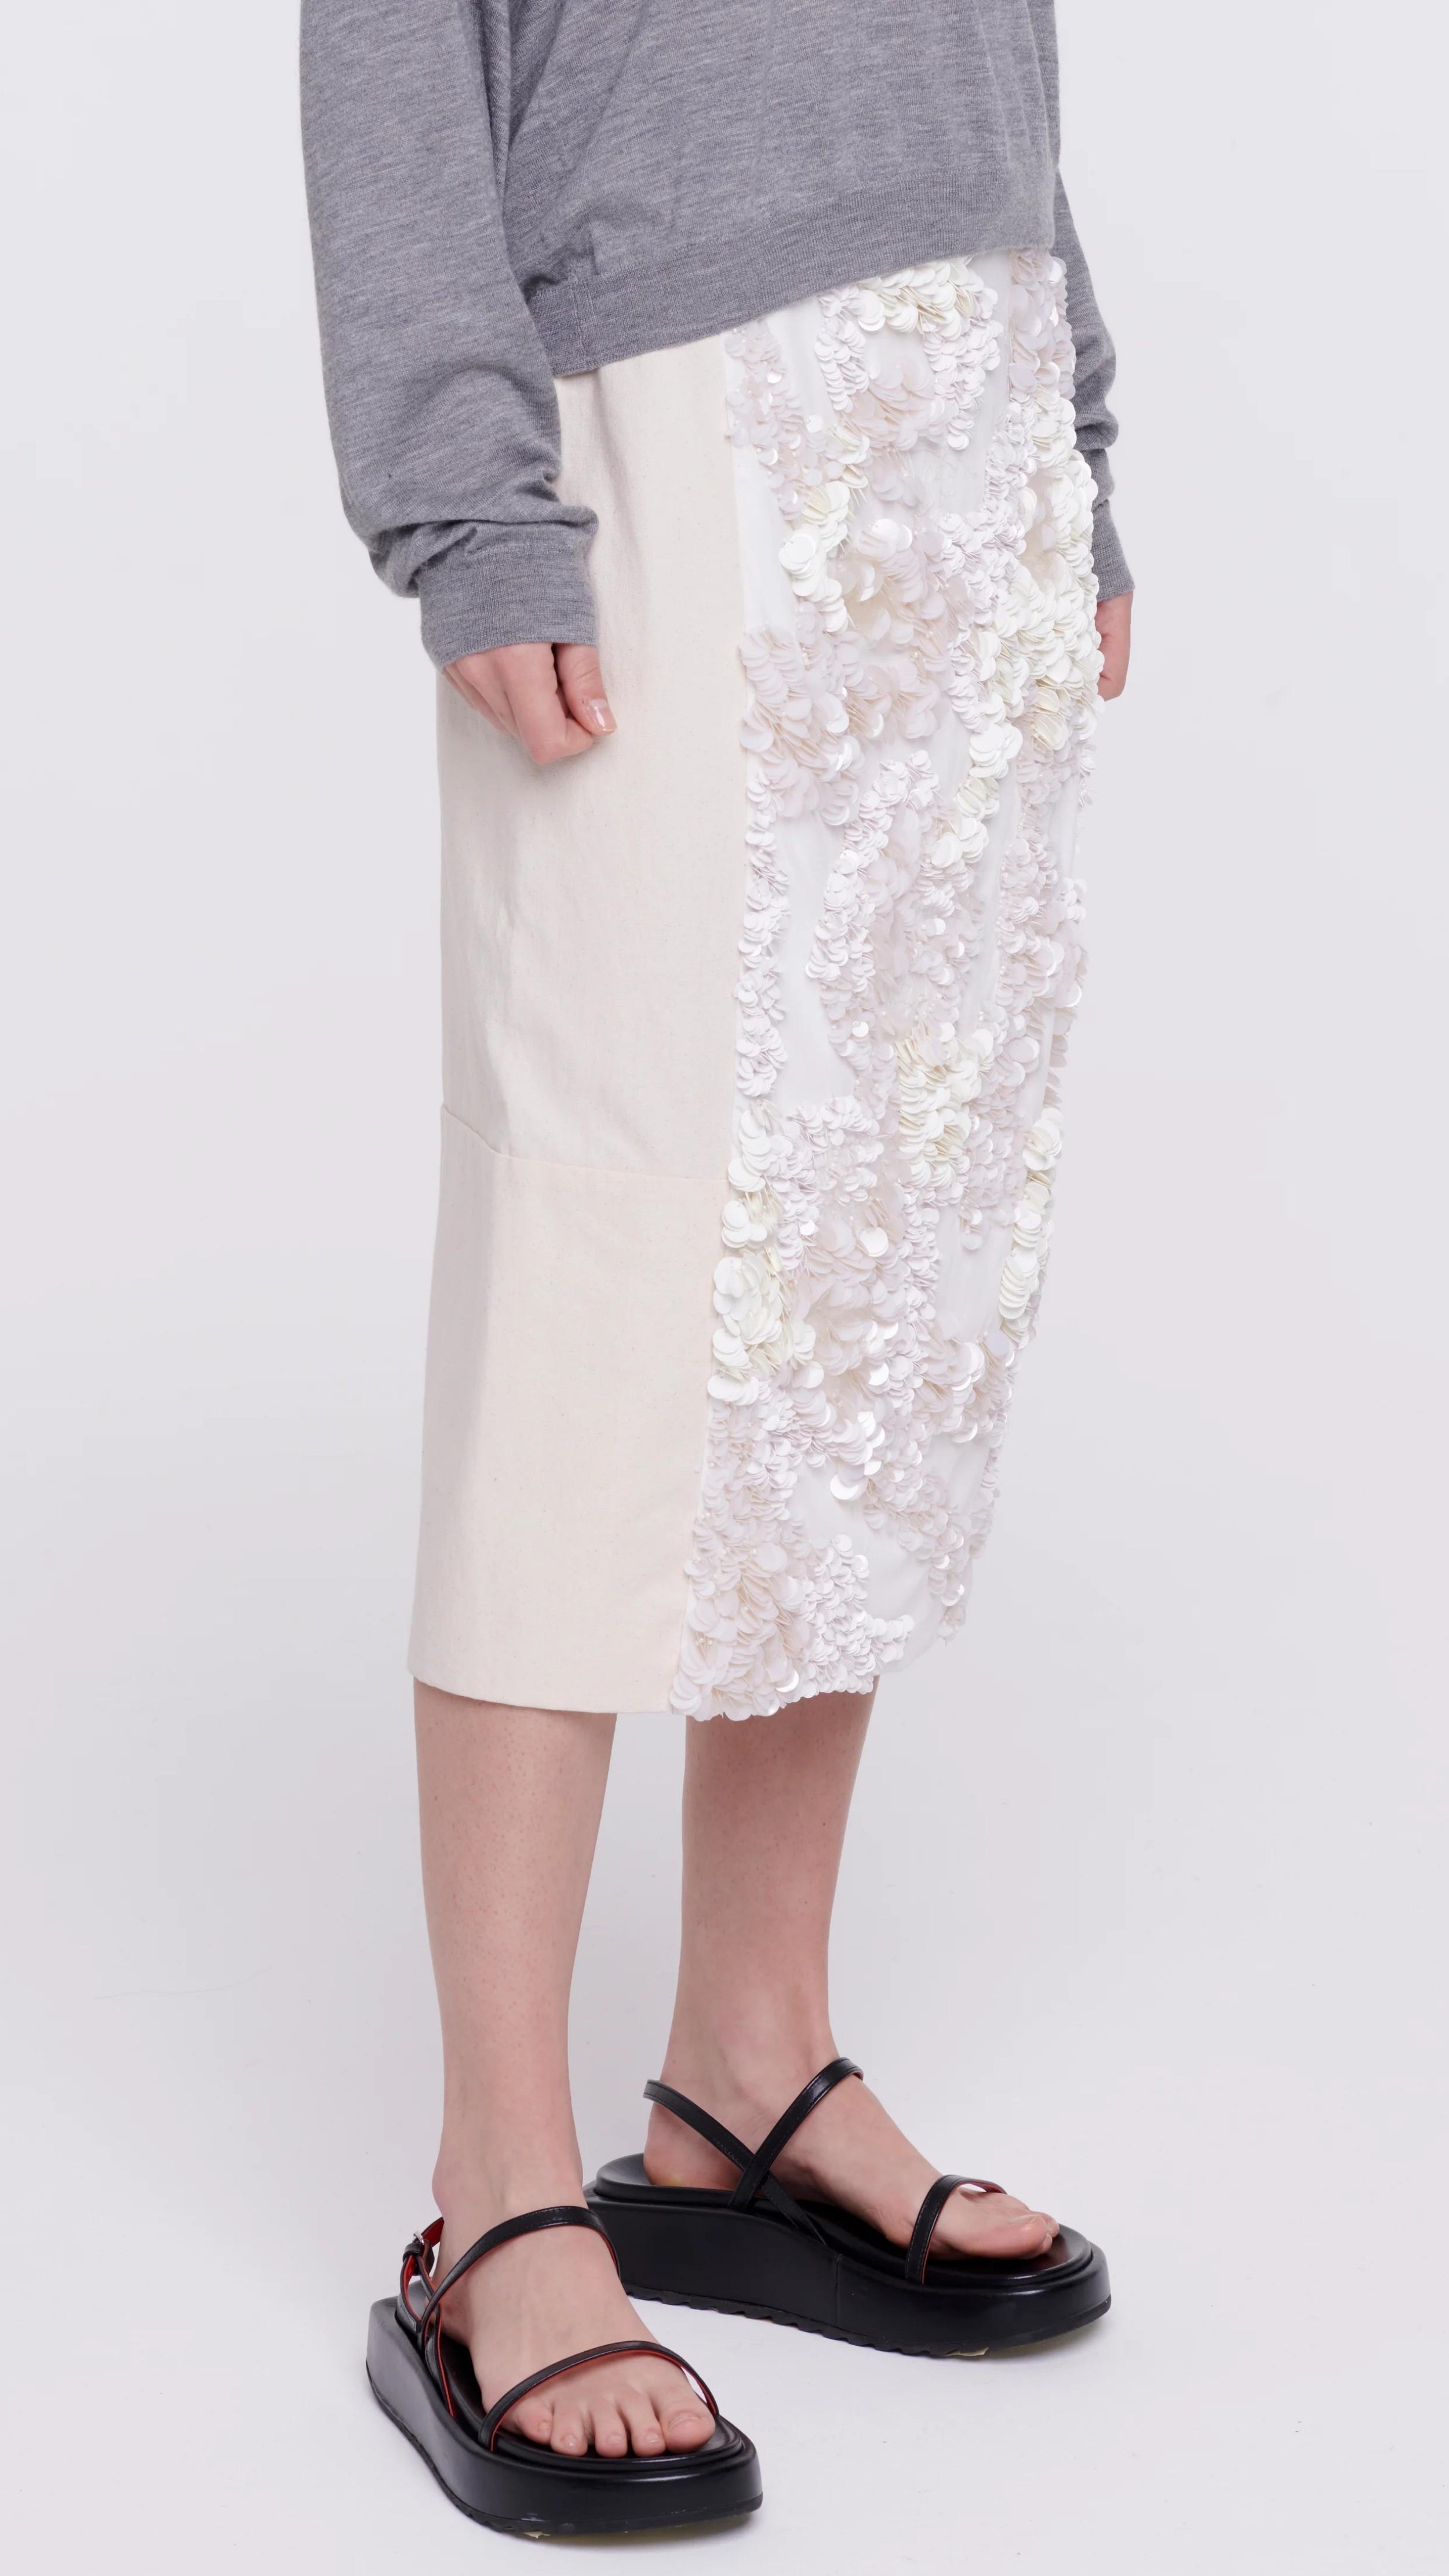 Plan C Panama Sequined Midi Skirt, Cotton panama midi skirt crafted in Italy with front panel of white sequins. This skirt has a contrasting black elastic waistband. The skirt falls to knee length. 